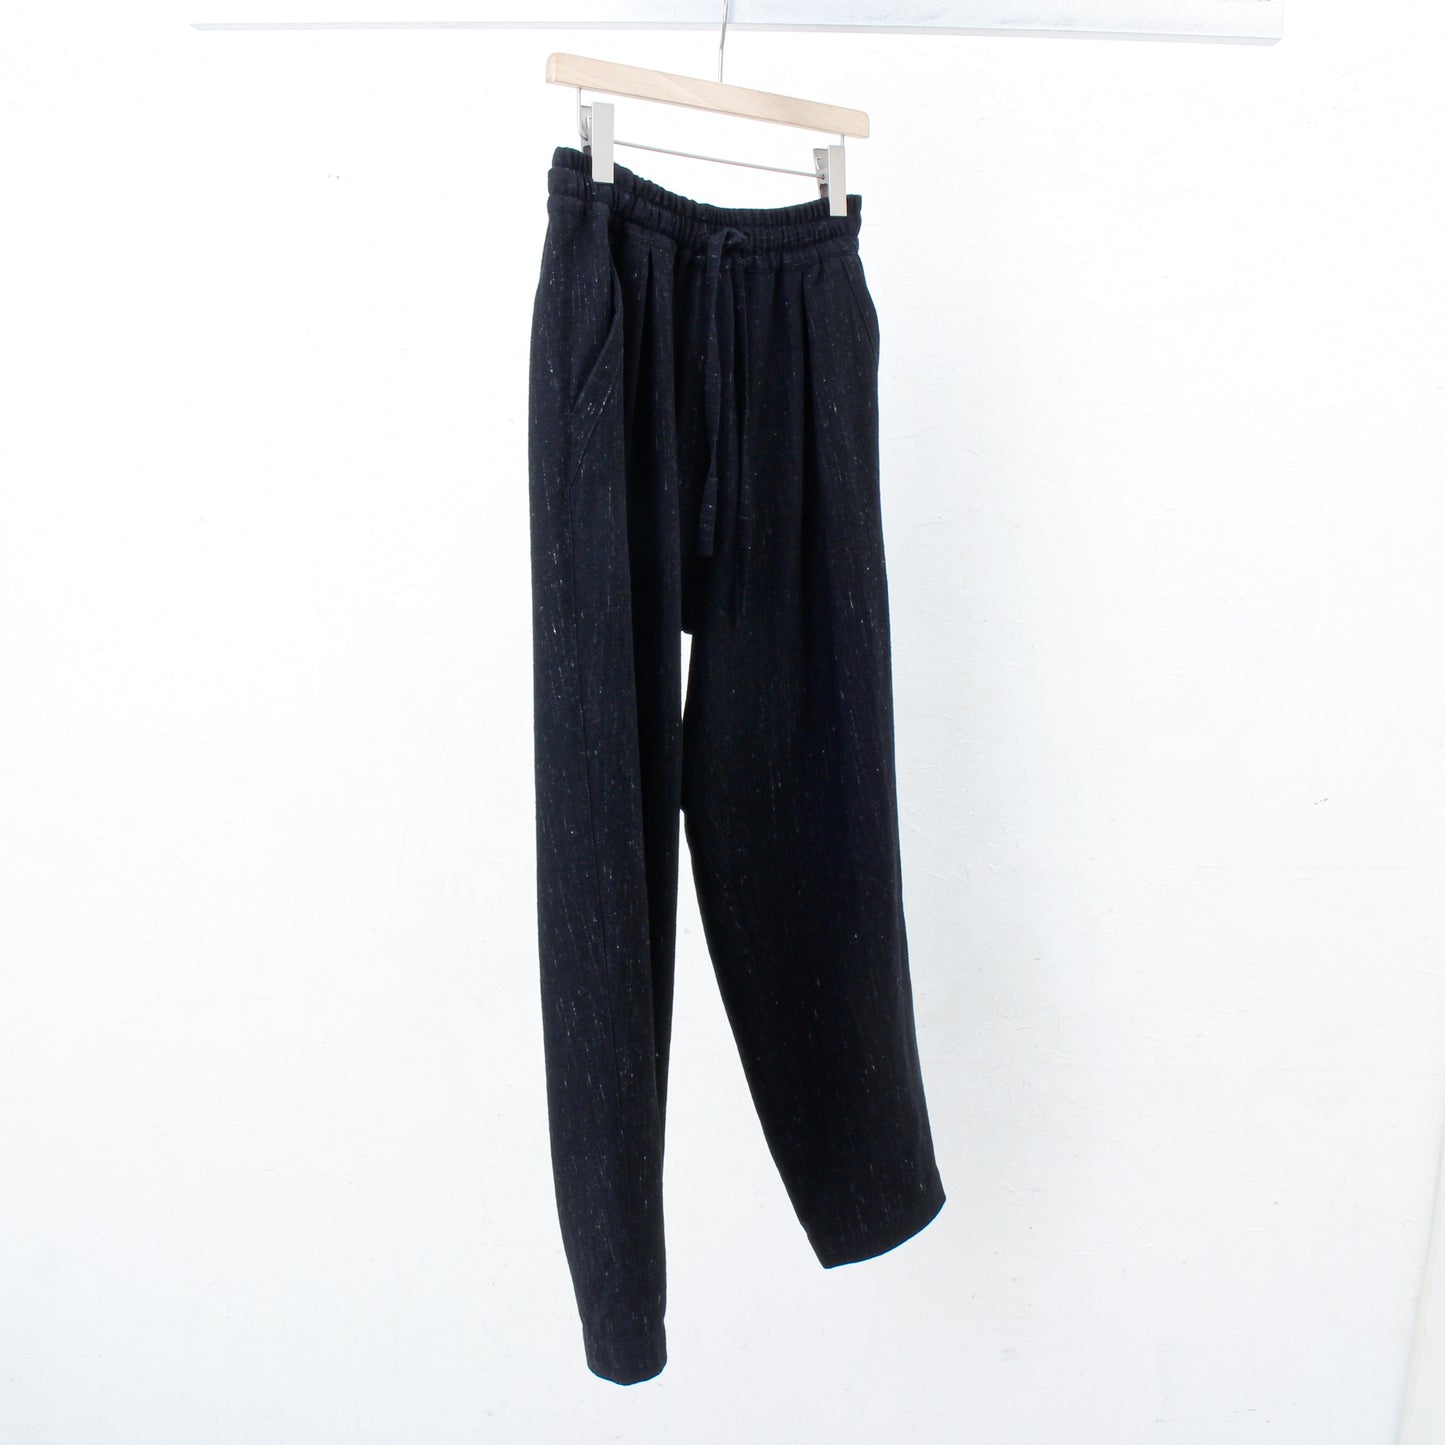 Cosmos LinenWool Tapered Pants